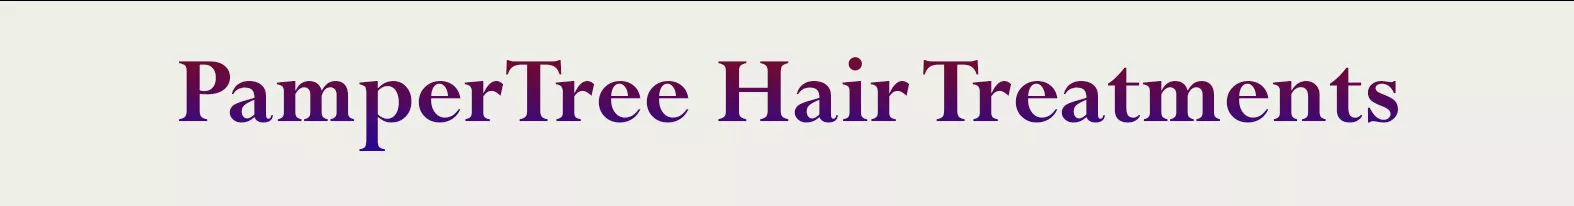 Hair Treatment at PamperTree - Information about our Hair Treatments